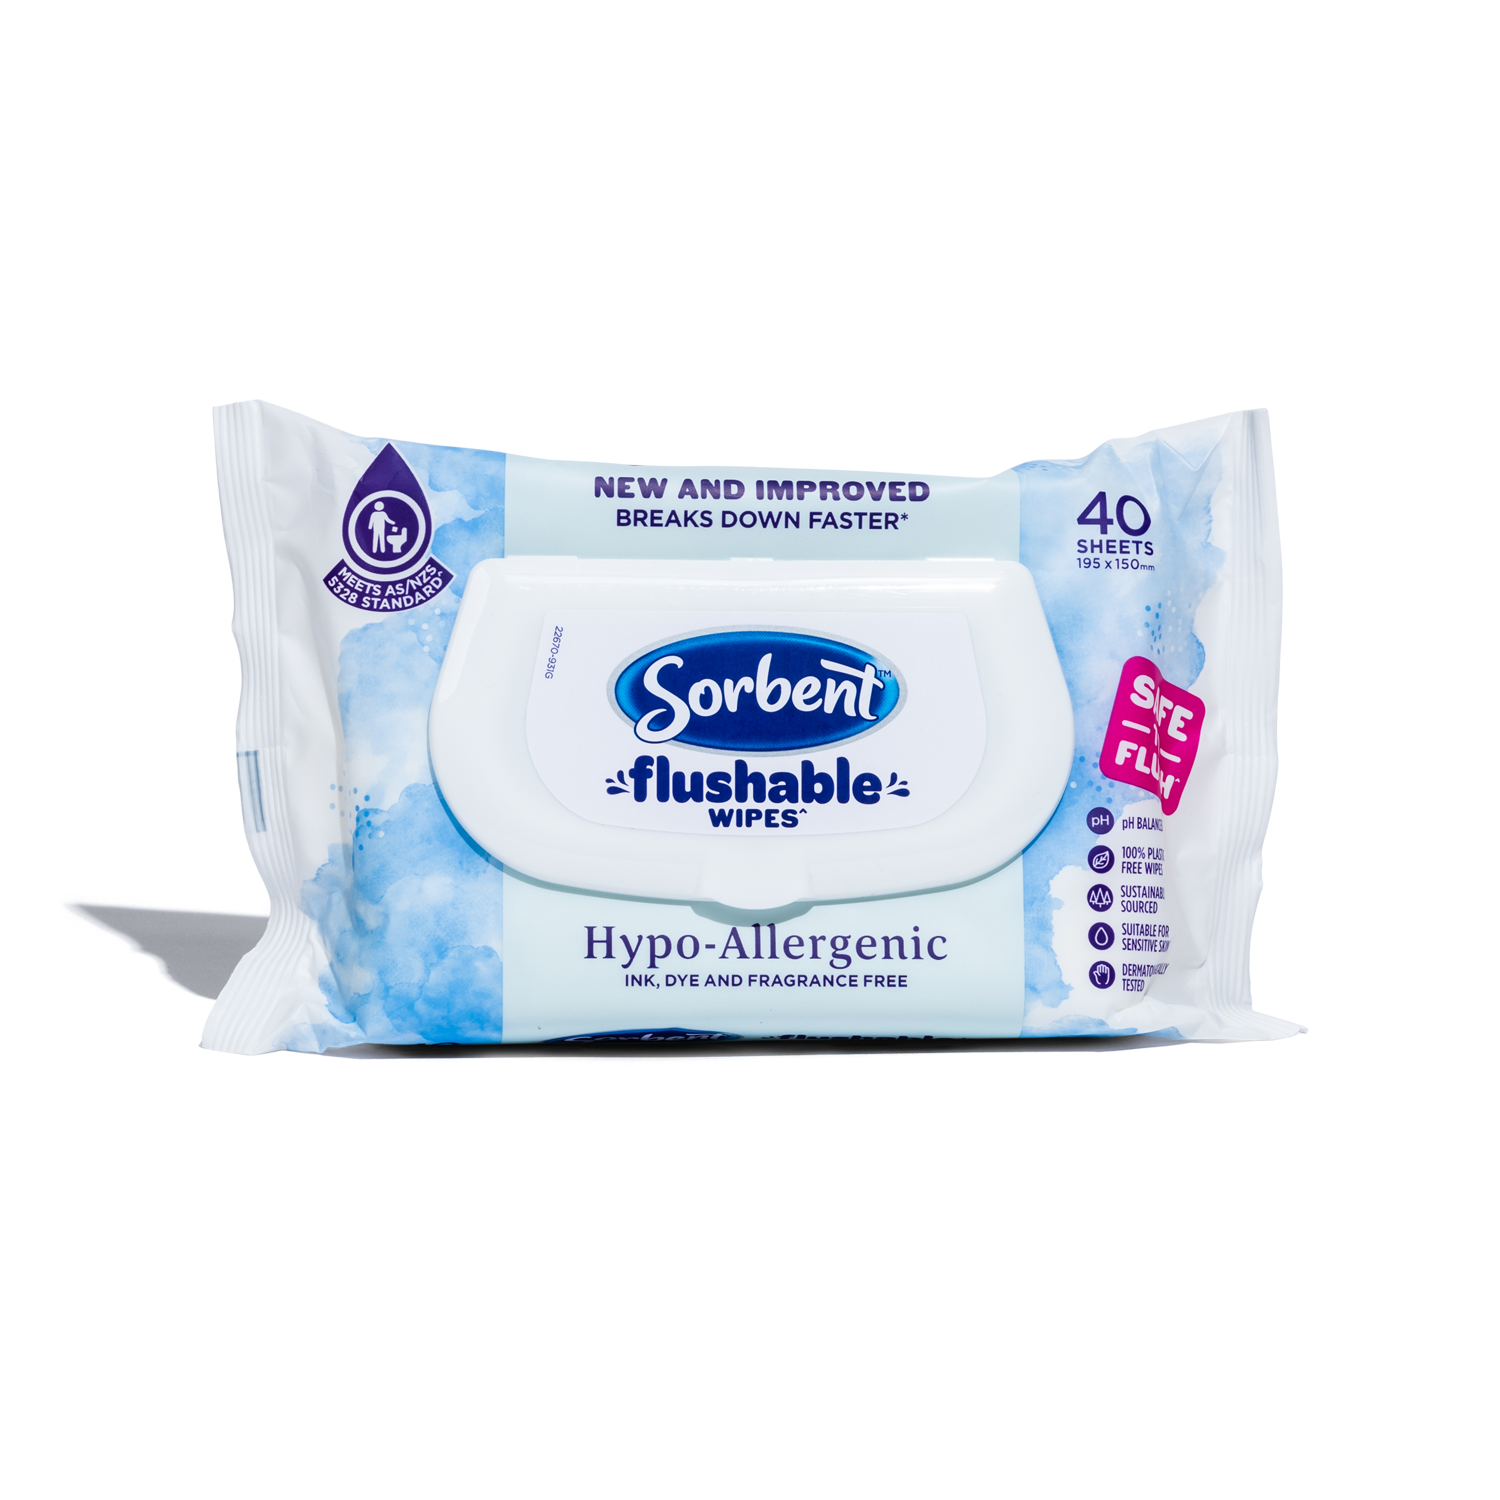 Hypo-Allergenic Flushable Wipes